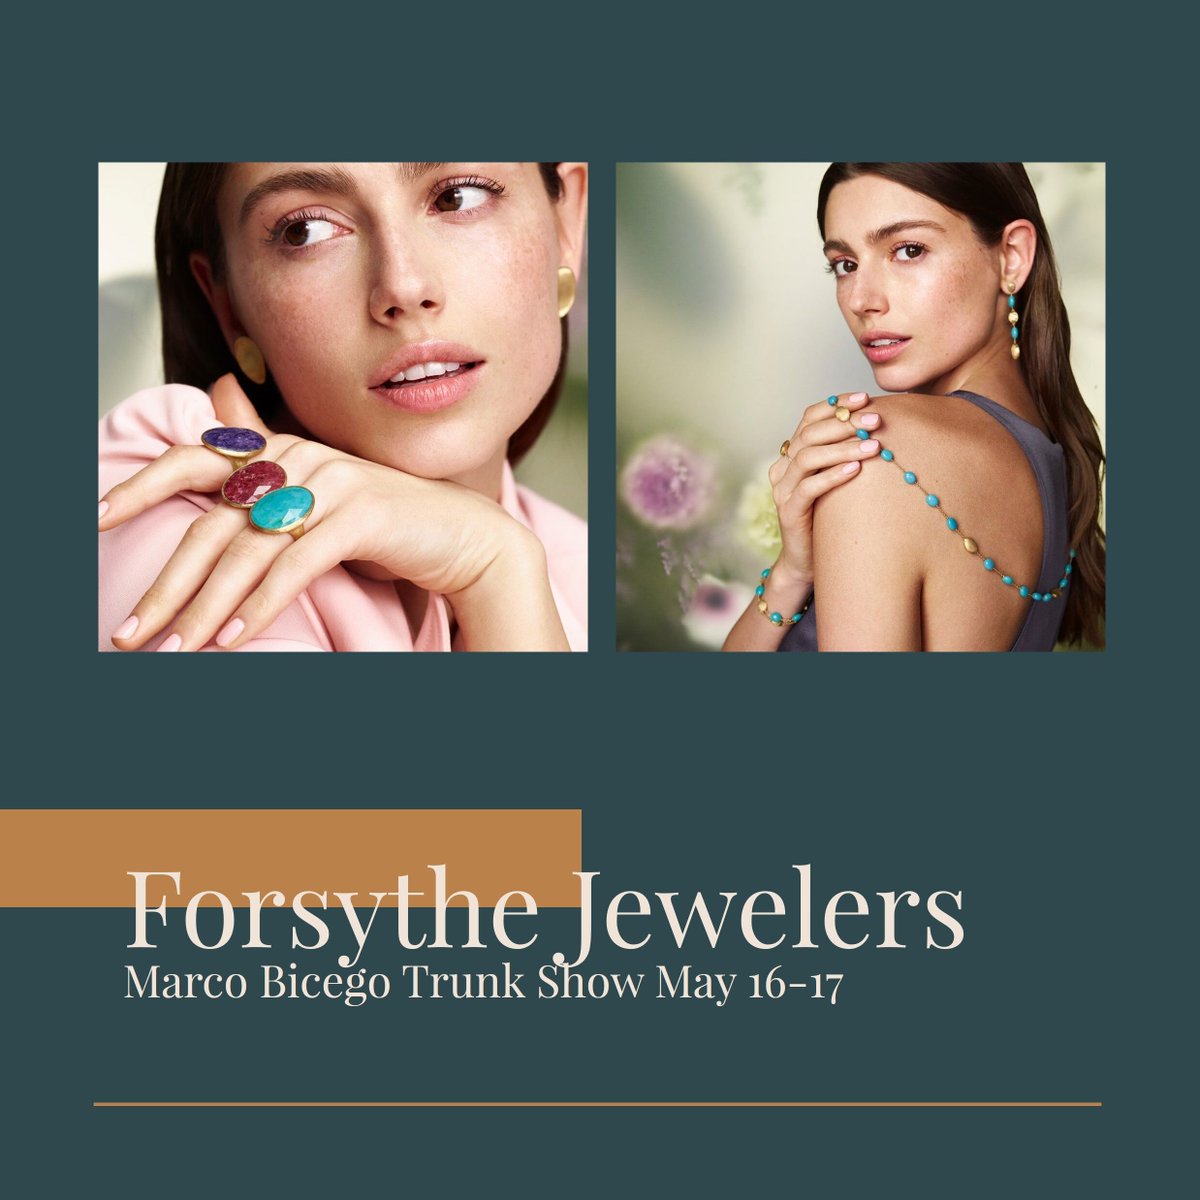 💍 Indulge in the allure of Marco Bicego's timeless creations at the upcoming Trunk Show at Forsythe Jewelers on May 16 & 17! Experience the blend of Old World charm and contemporary flair in each handcrafted piece.
shop-sp.com/marco

#seapines #hiltonhead #hhi